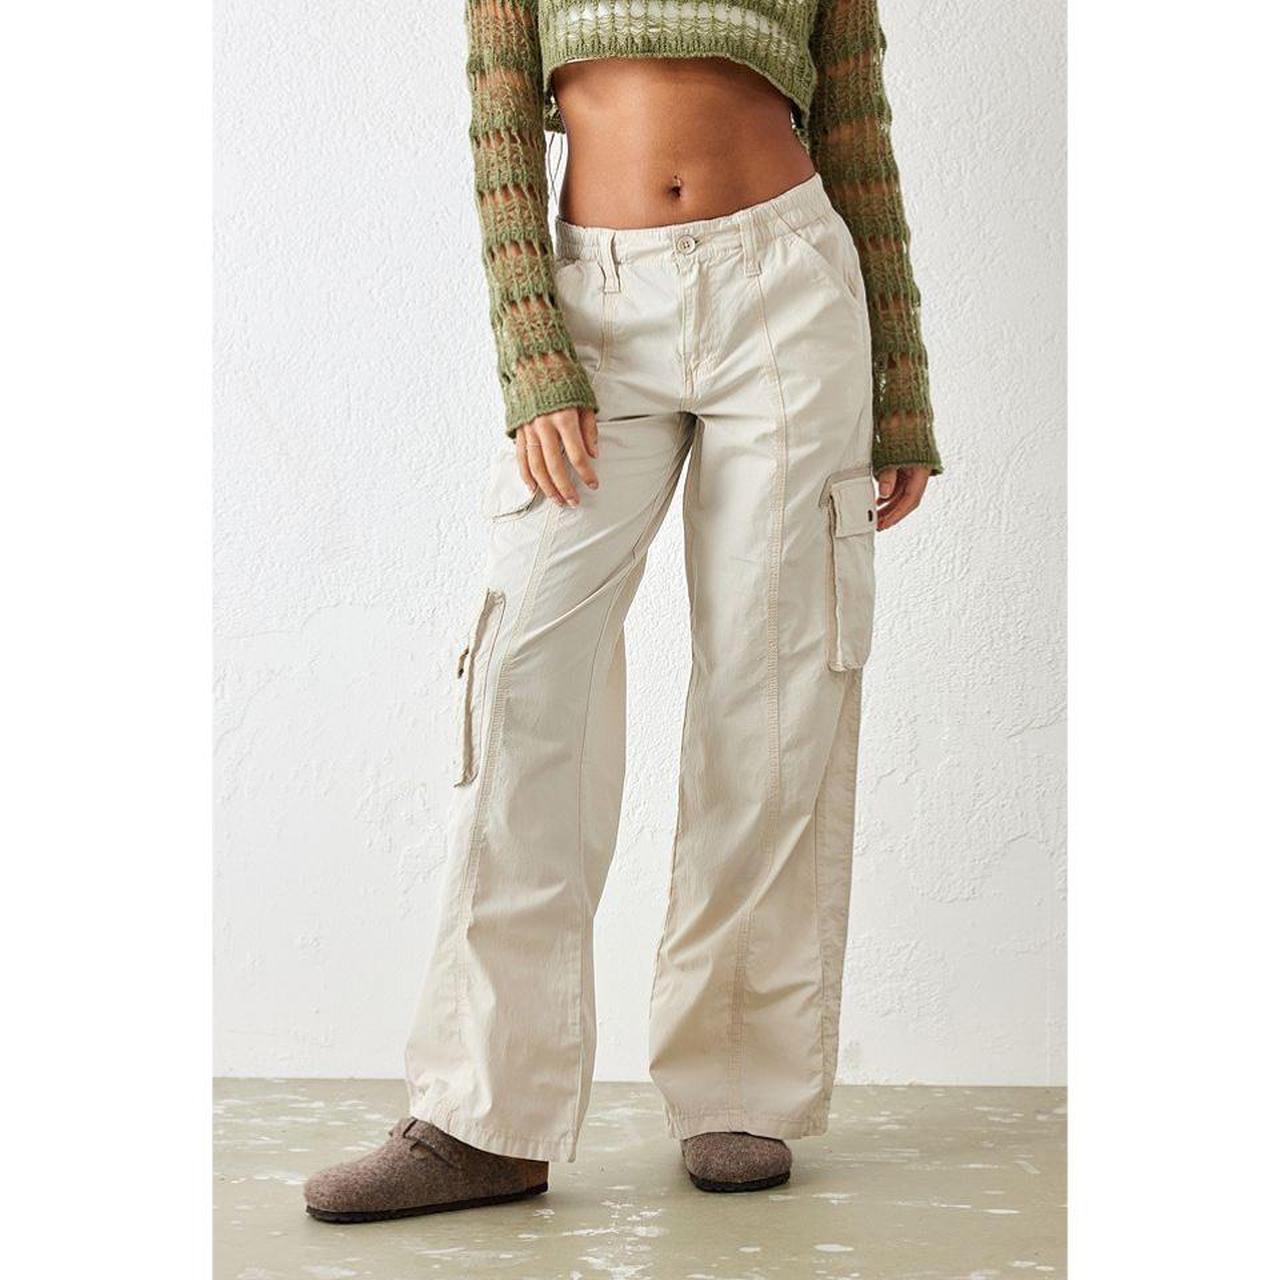 Low Rise BDG cream cargo trousers Urban Outfitters... - Depop